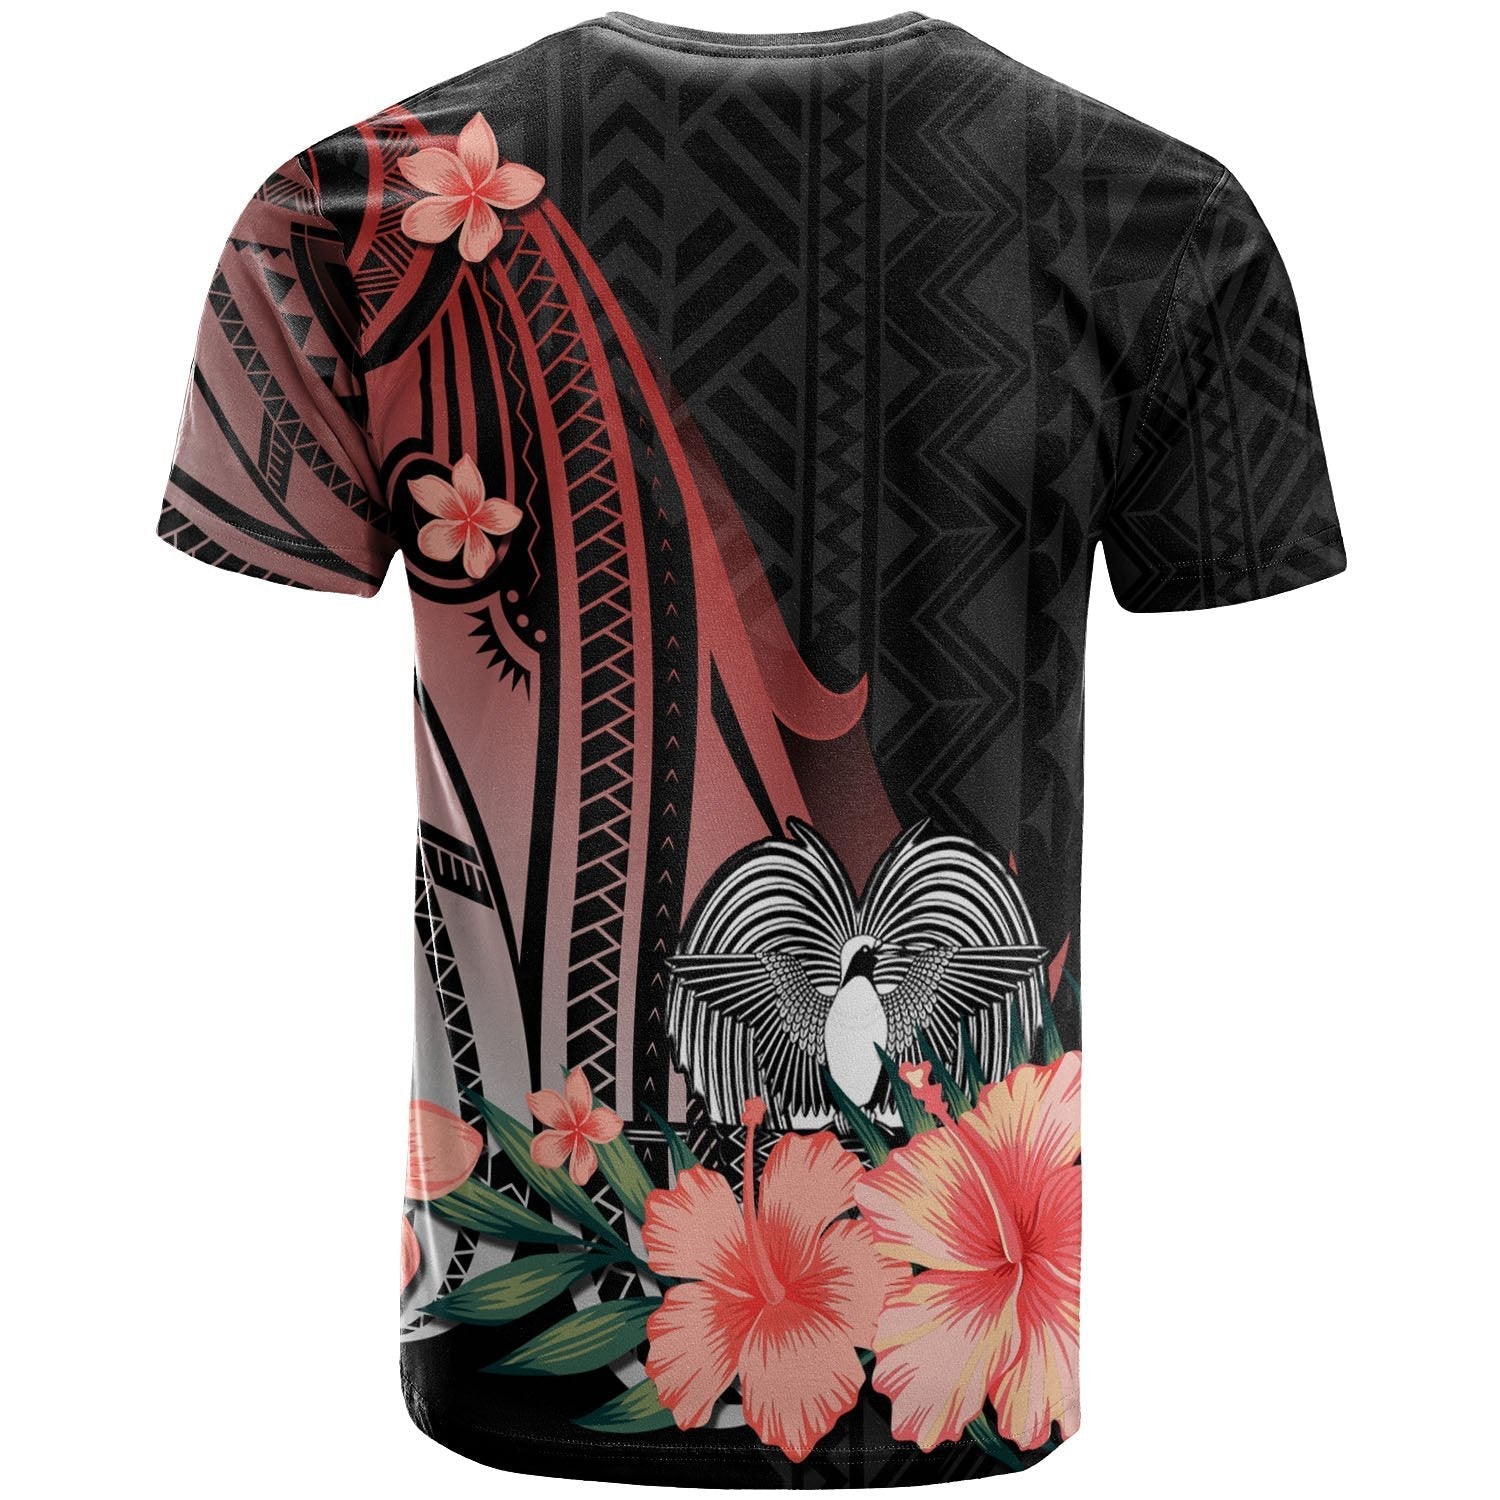 papua-new-guinea-personalised-custom-t-shirt-red-polynesian-hibiscus-pattern-style